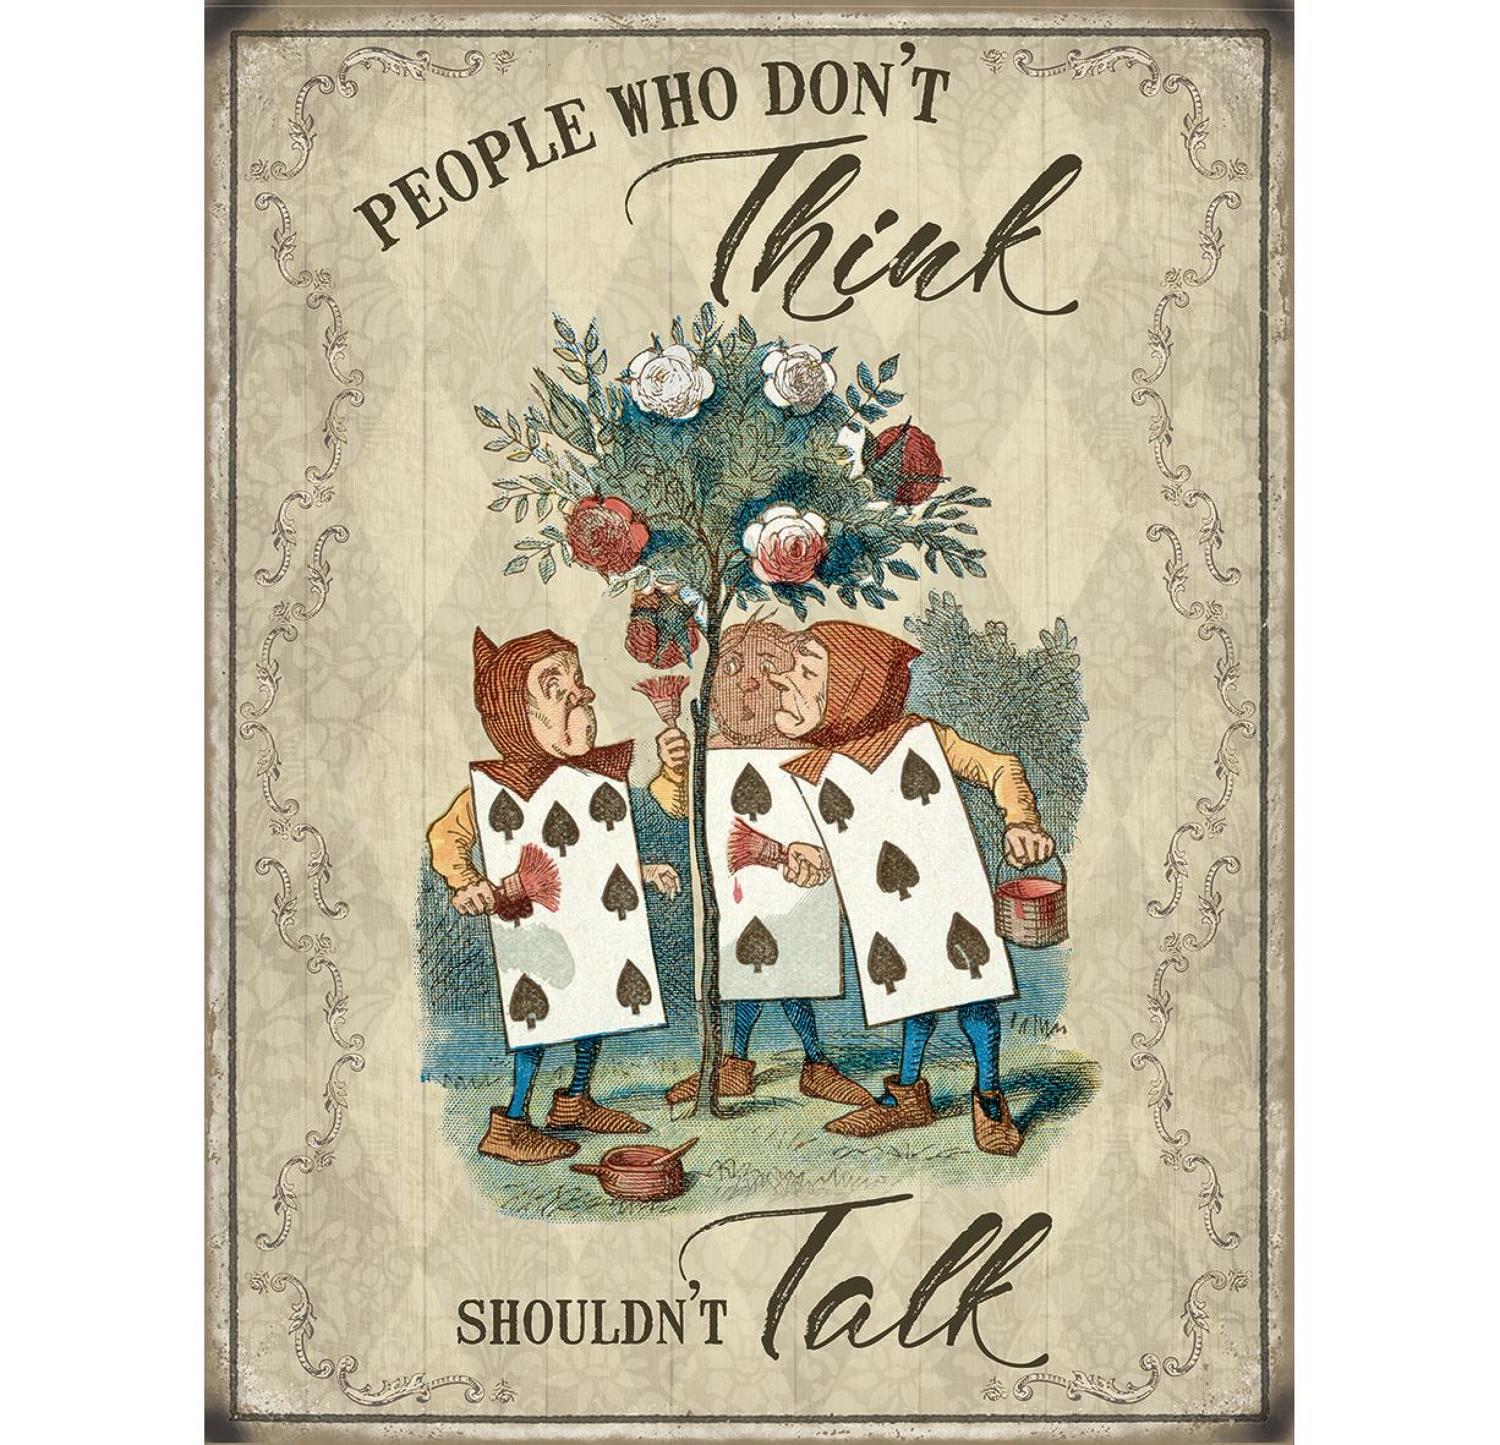 Alice in Wonderland, People who don't think, metal sign.